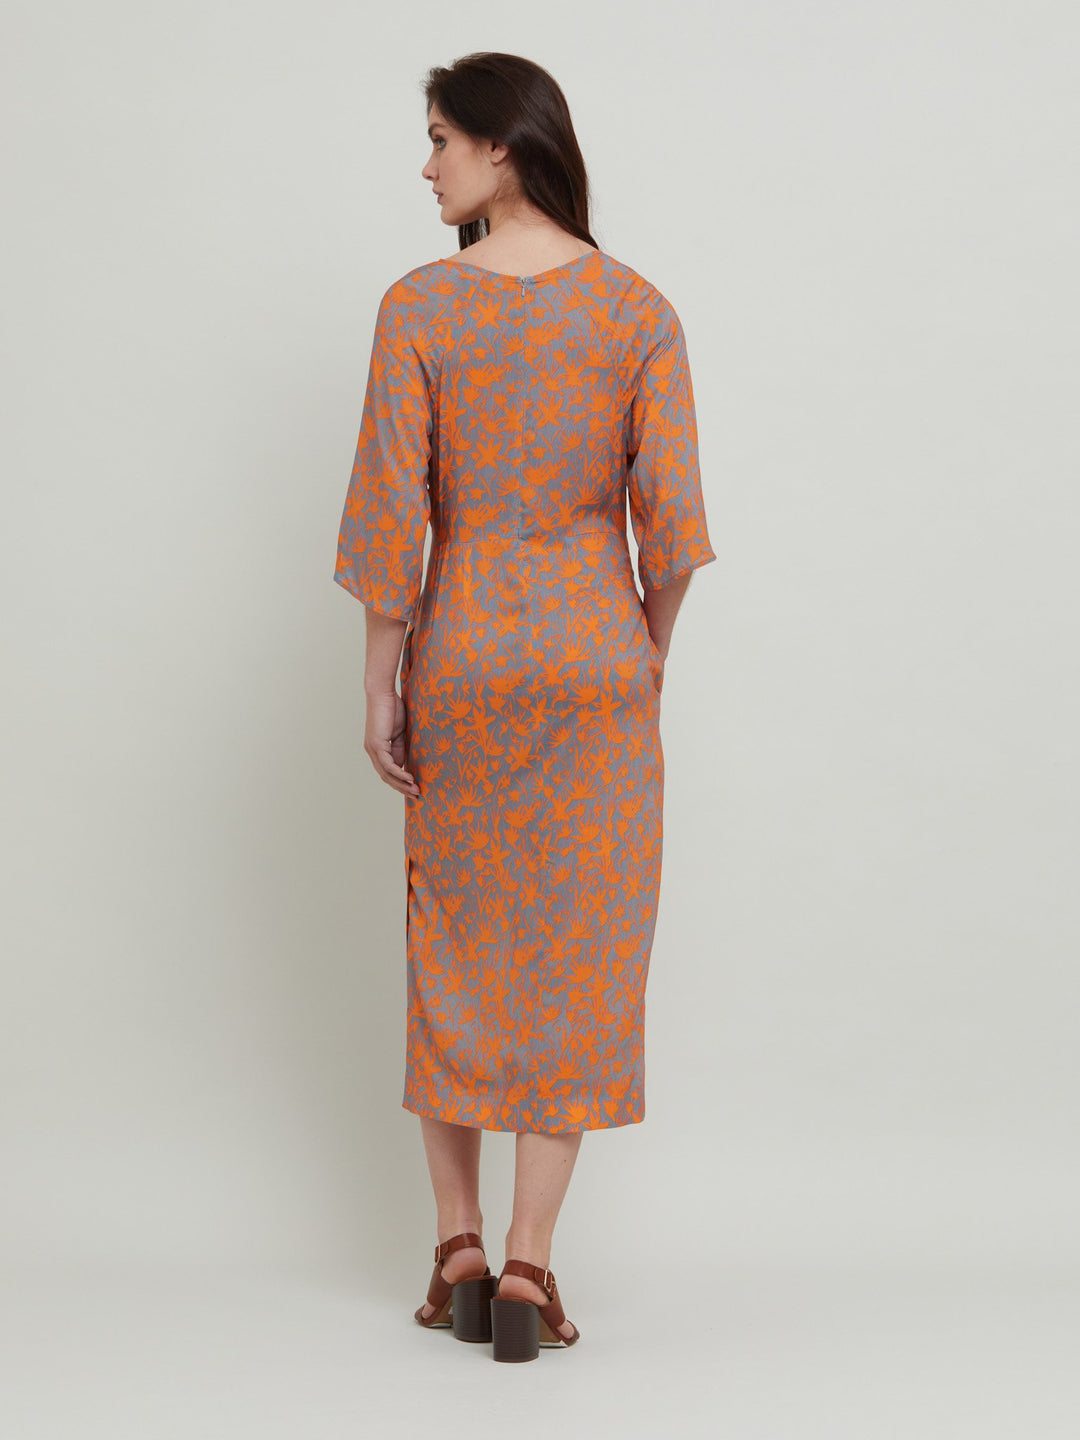 Introducing the Ailbhe, dress. This fun & easy fitting V-neck silhouette features front ties, slashed bodice, side seam pockets and falls to the mid-calf. Crafted in an adventurous and sophisticated rust & smoky blue printed breathable viscose.  Designed in Ireland by Helen McAlinden. Made in Europe. Free shipping to the EU & UK.